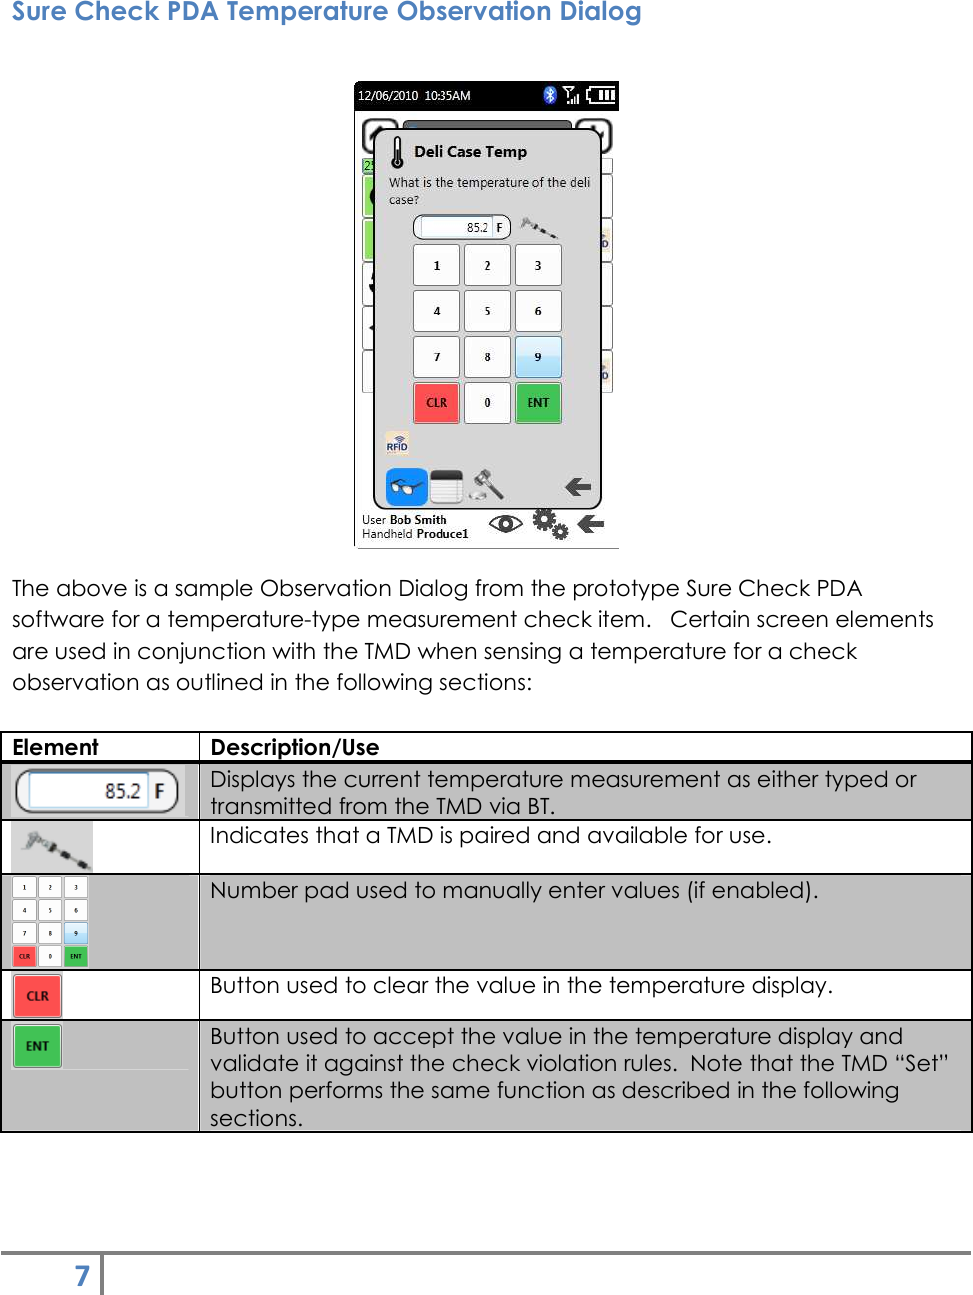 7    Sure Check PDA Temperature Observation Dialog   The above is a sample Observation Dialog from the prototype Sure Check PDA software for a temperature-type measurement check item.   Certain screen elements are used in conjunction with the TMD when sensing a temperature for a check observation as outlined in the following sections:  Element  Description/Use  Displays the current temperature measurement as either typed or transmitted from the TMD via BT.  Indicates that a TMD is paired and available for use.  Number pad used to manually enter values (if enabled).  Button used to clear the value in the temperature display.  Button used to accept the value in the temperature display and validate it against the check violation rules.  Note that the TMD “Set” button performs the same function as described in the following sections. 